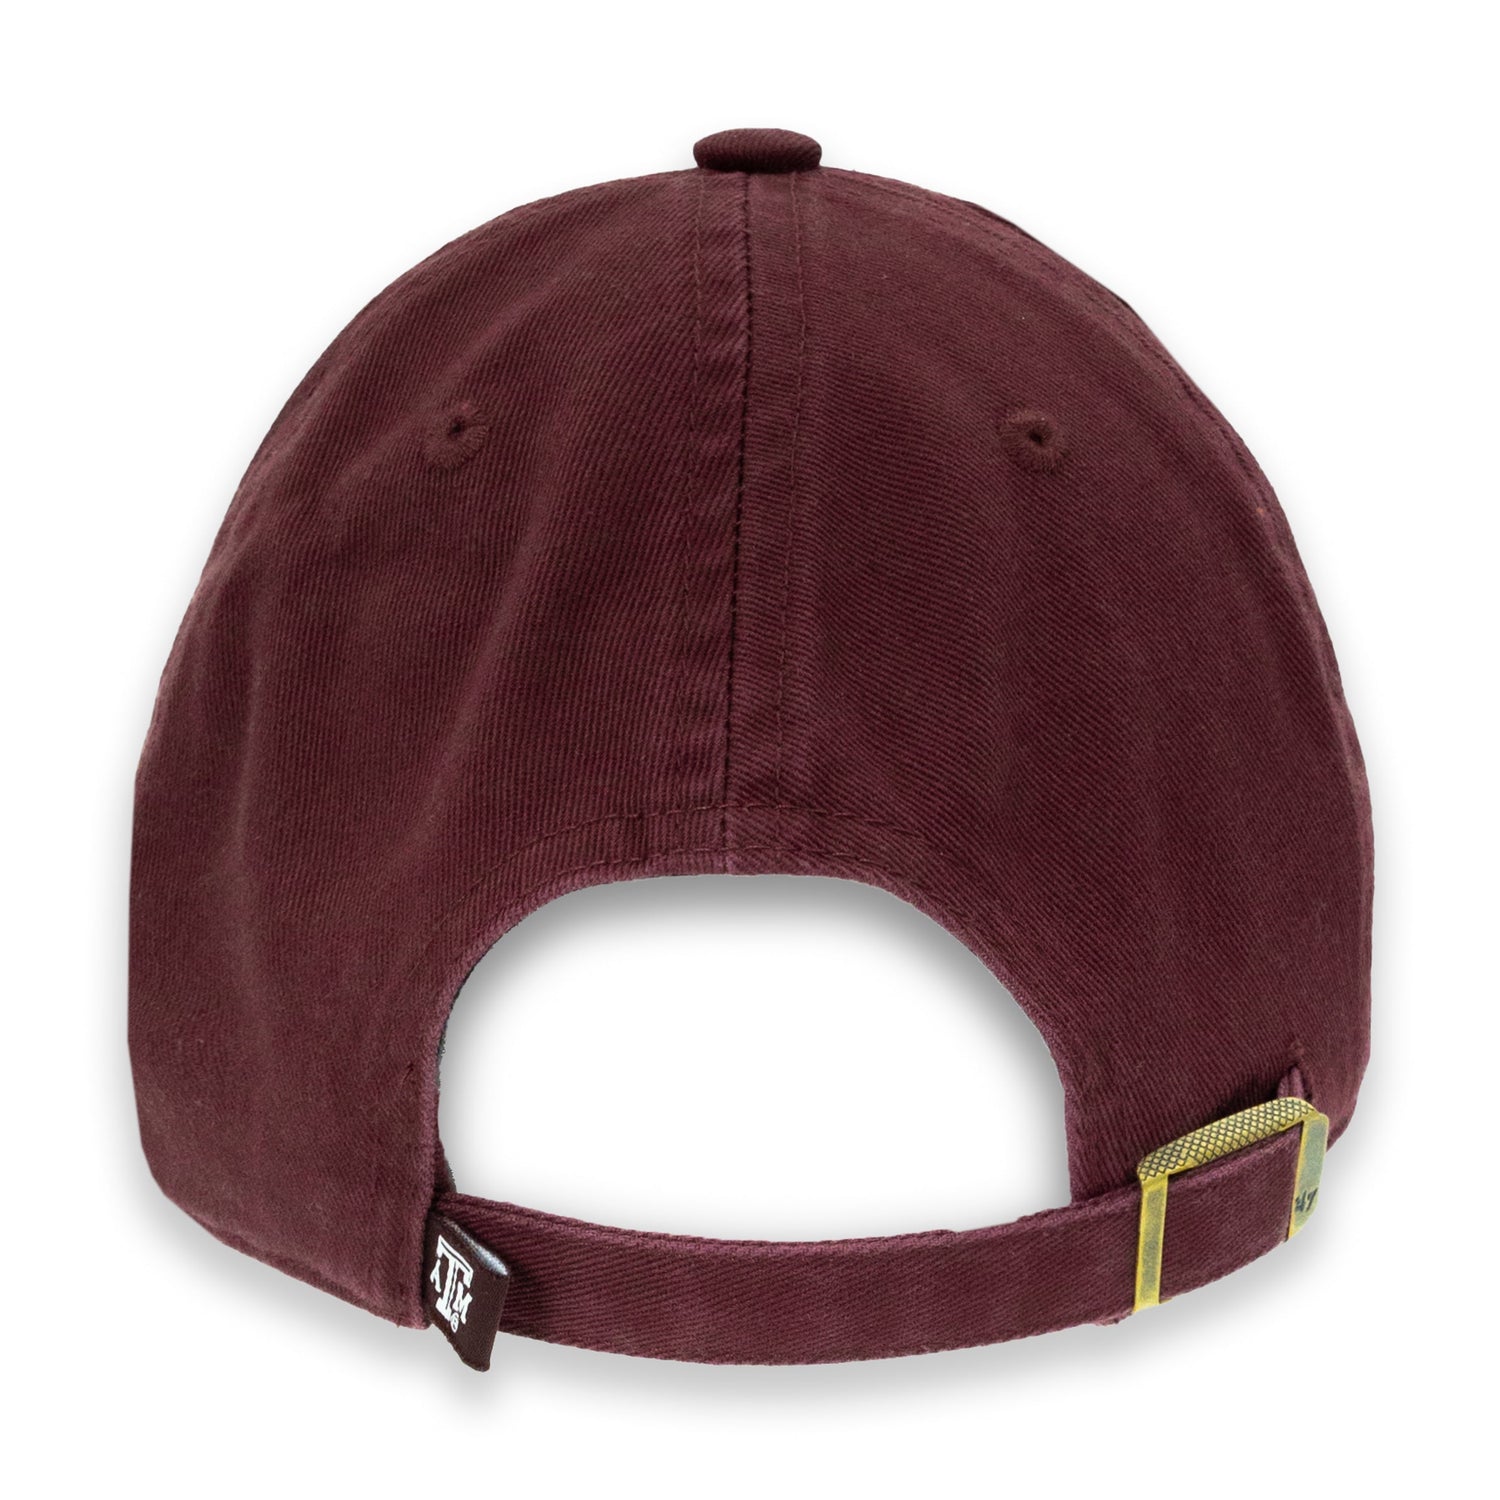 Texas A&M '47 Brand Youth Clean Up Cap